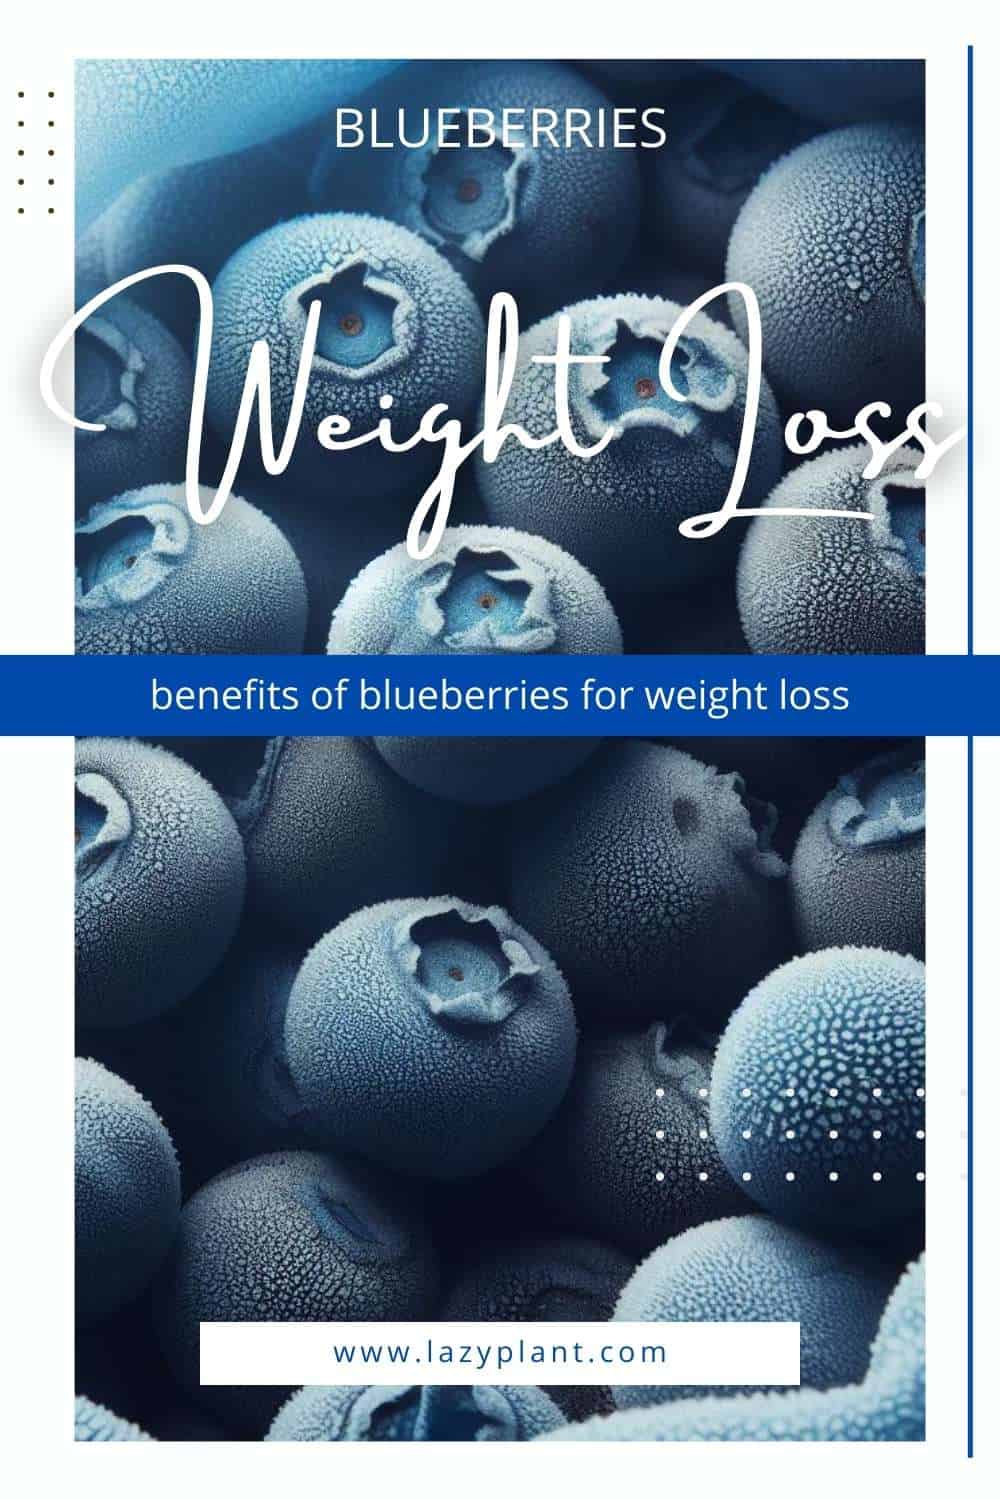 Benefits of blueberries for Weight Loss.